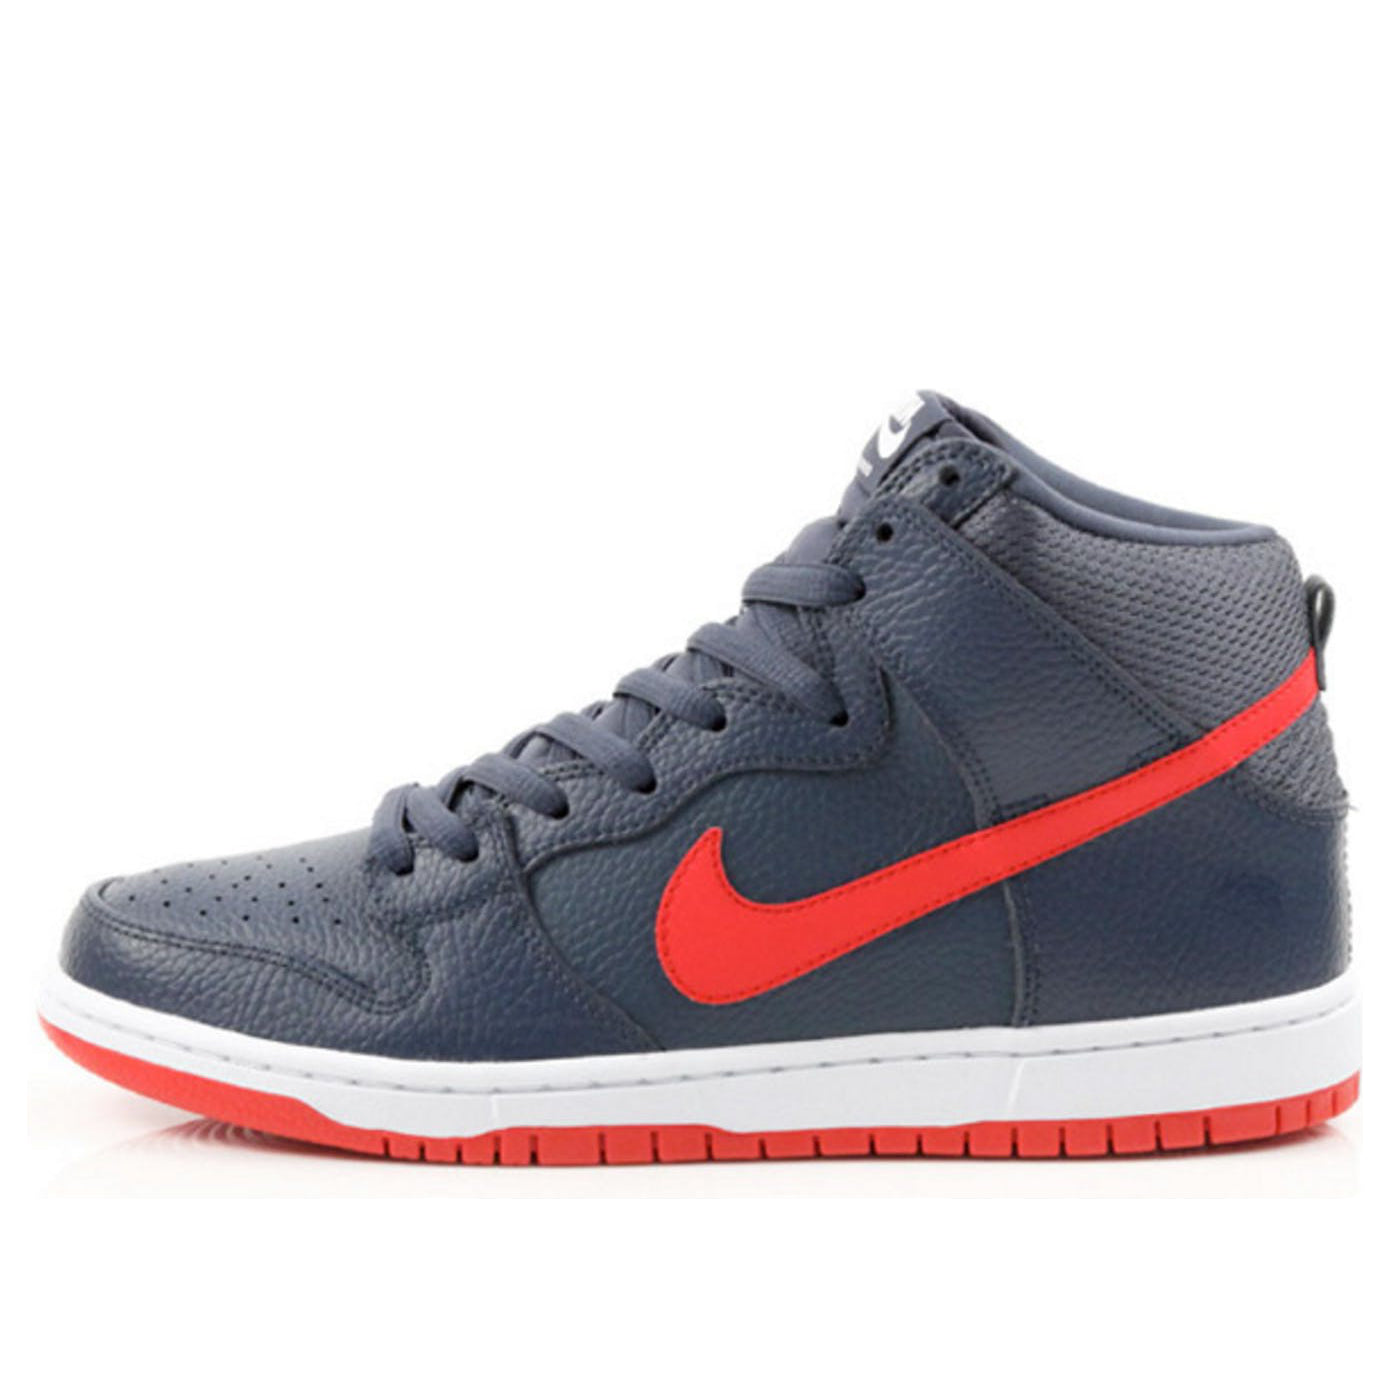 Nike Dunk High Pro Sb 'Squadron Blue University Red' 305050-463 Iconic Trainers - Click Image to Close